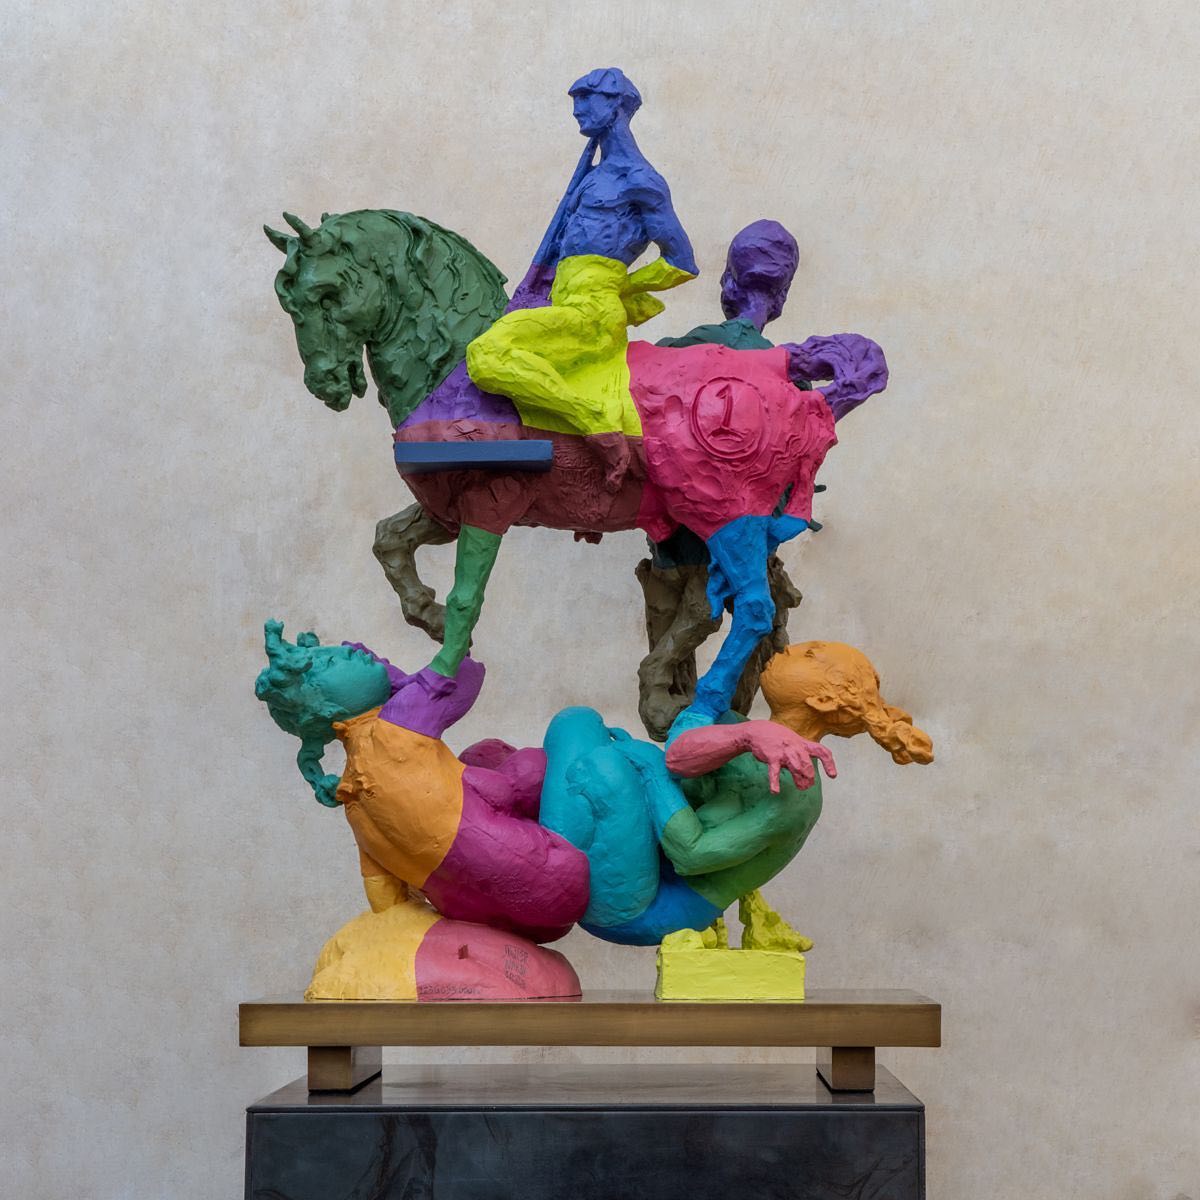 Multicolored 3d Printed Sculptures By Javier Marin (6)